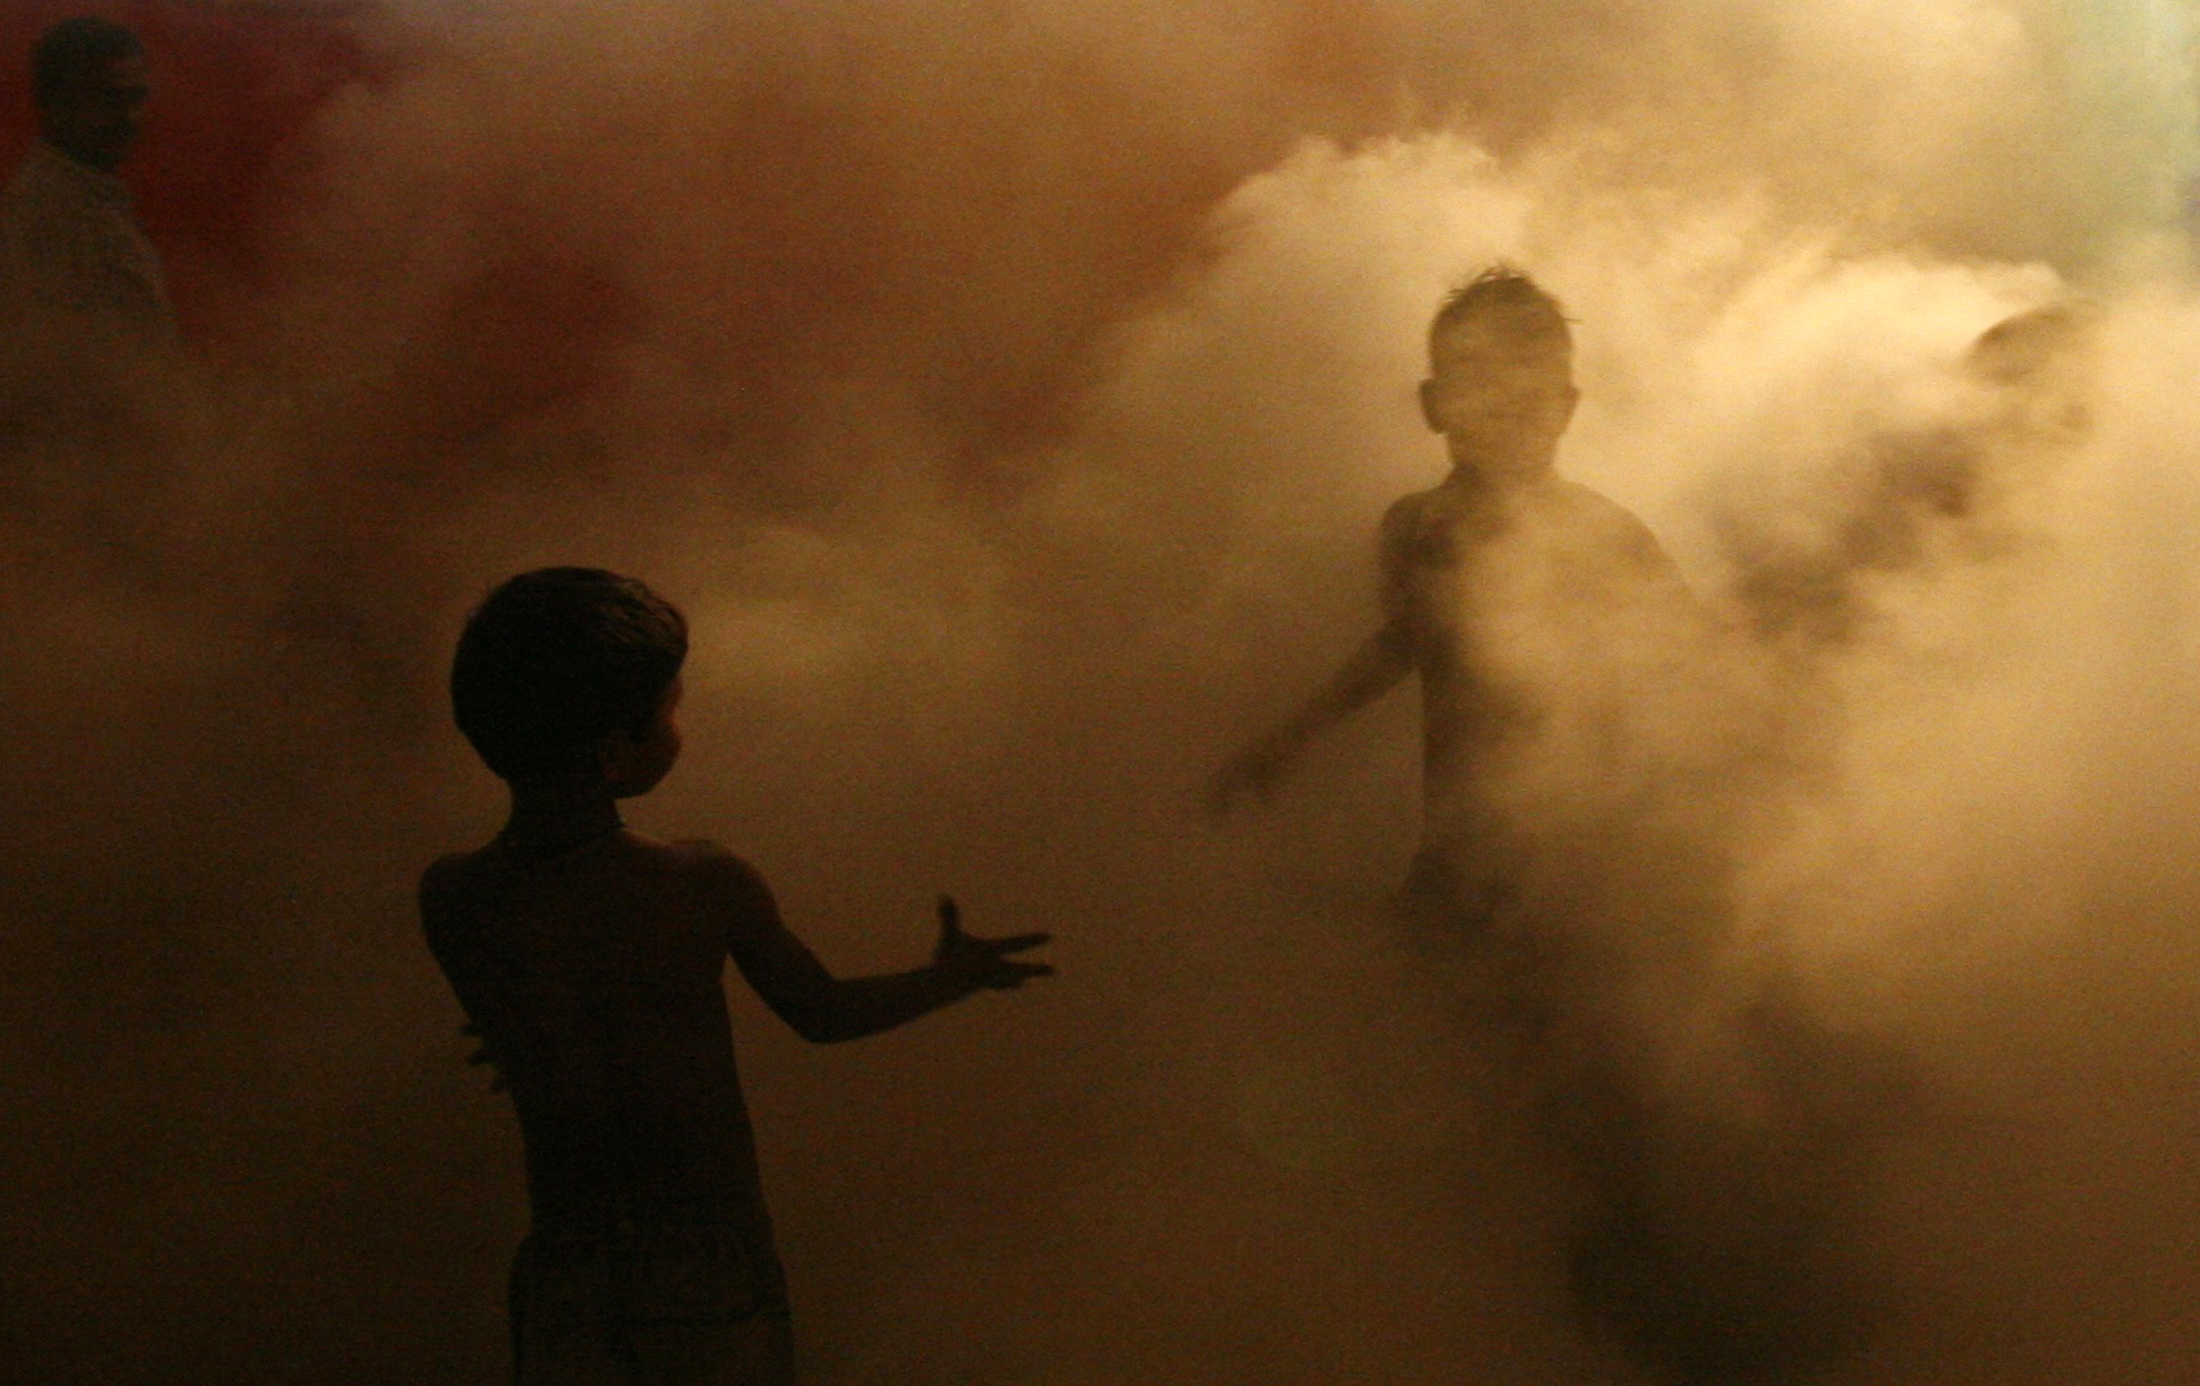 Children of local residents play through an area being fumigated by municipal workers at Noida, in the northern Indian state of Uttar Pradesh